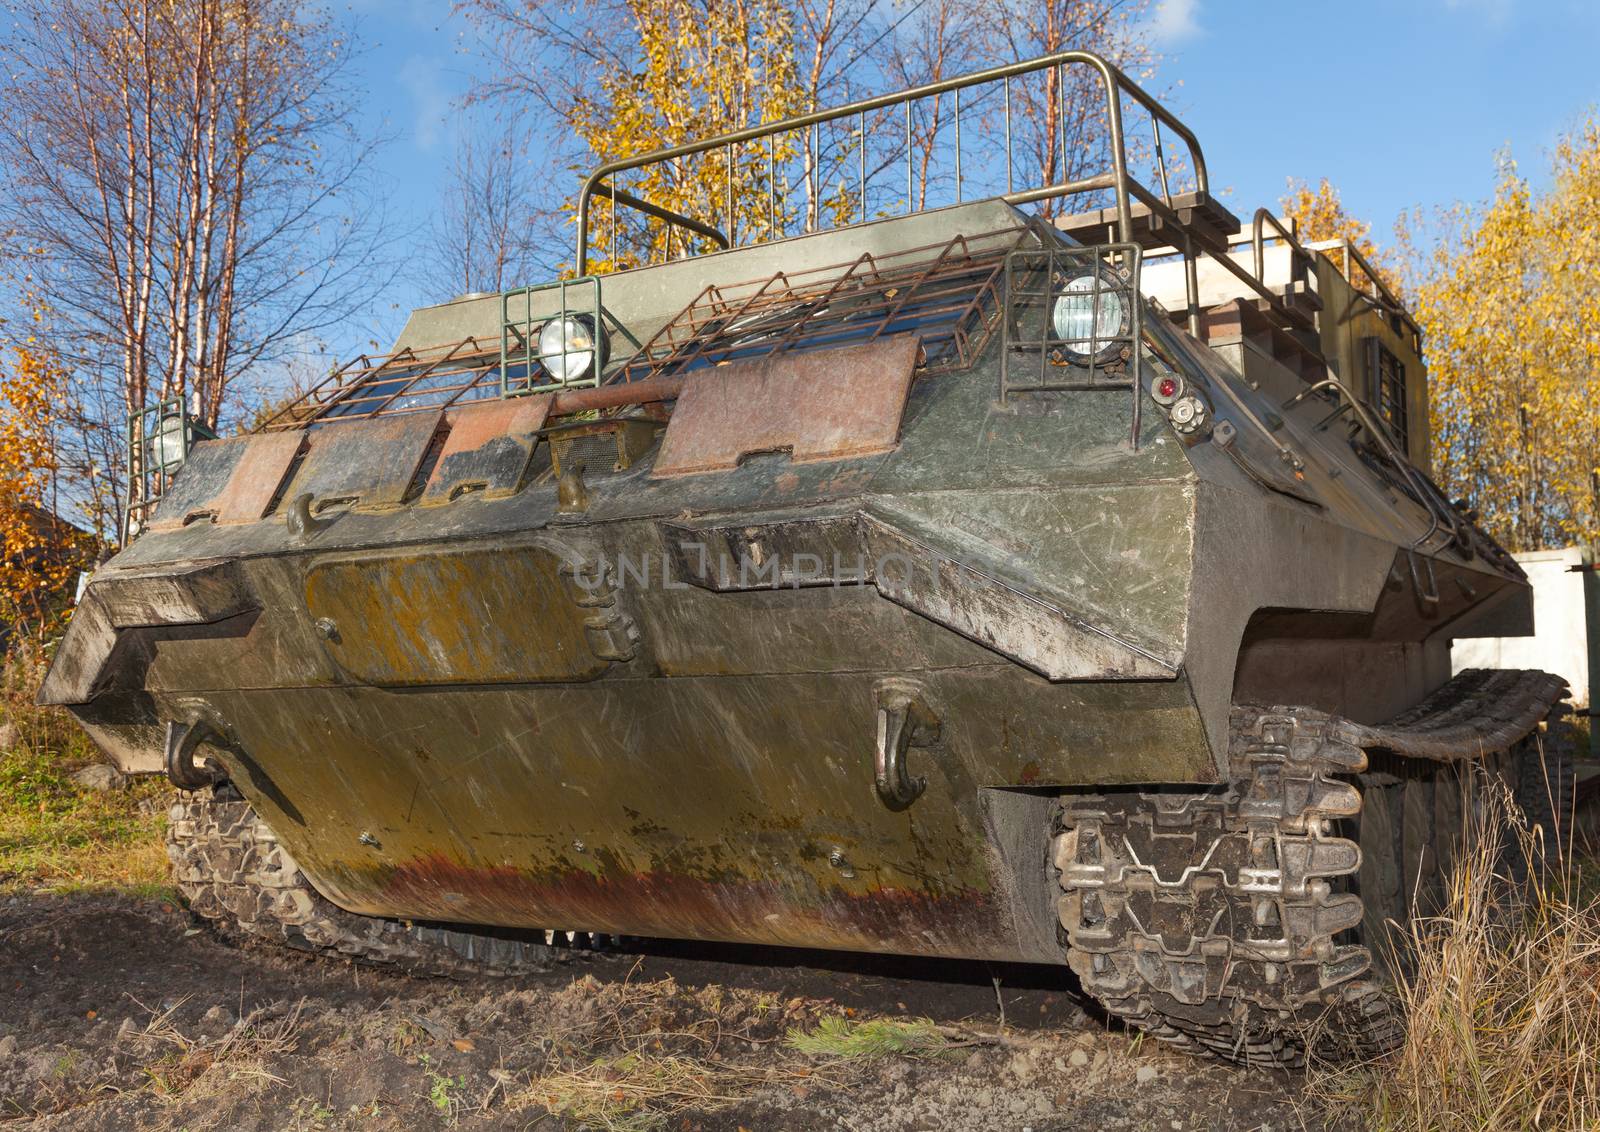 The tracked vehicle for transportation of soldiers in the real world 